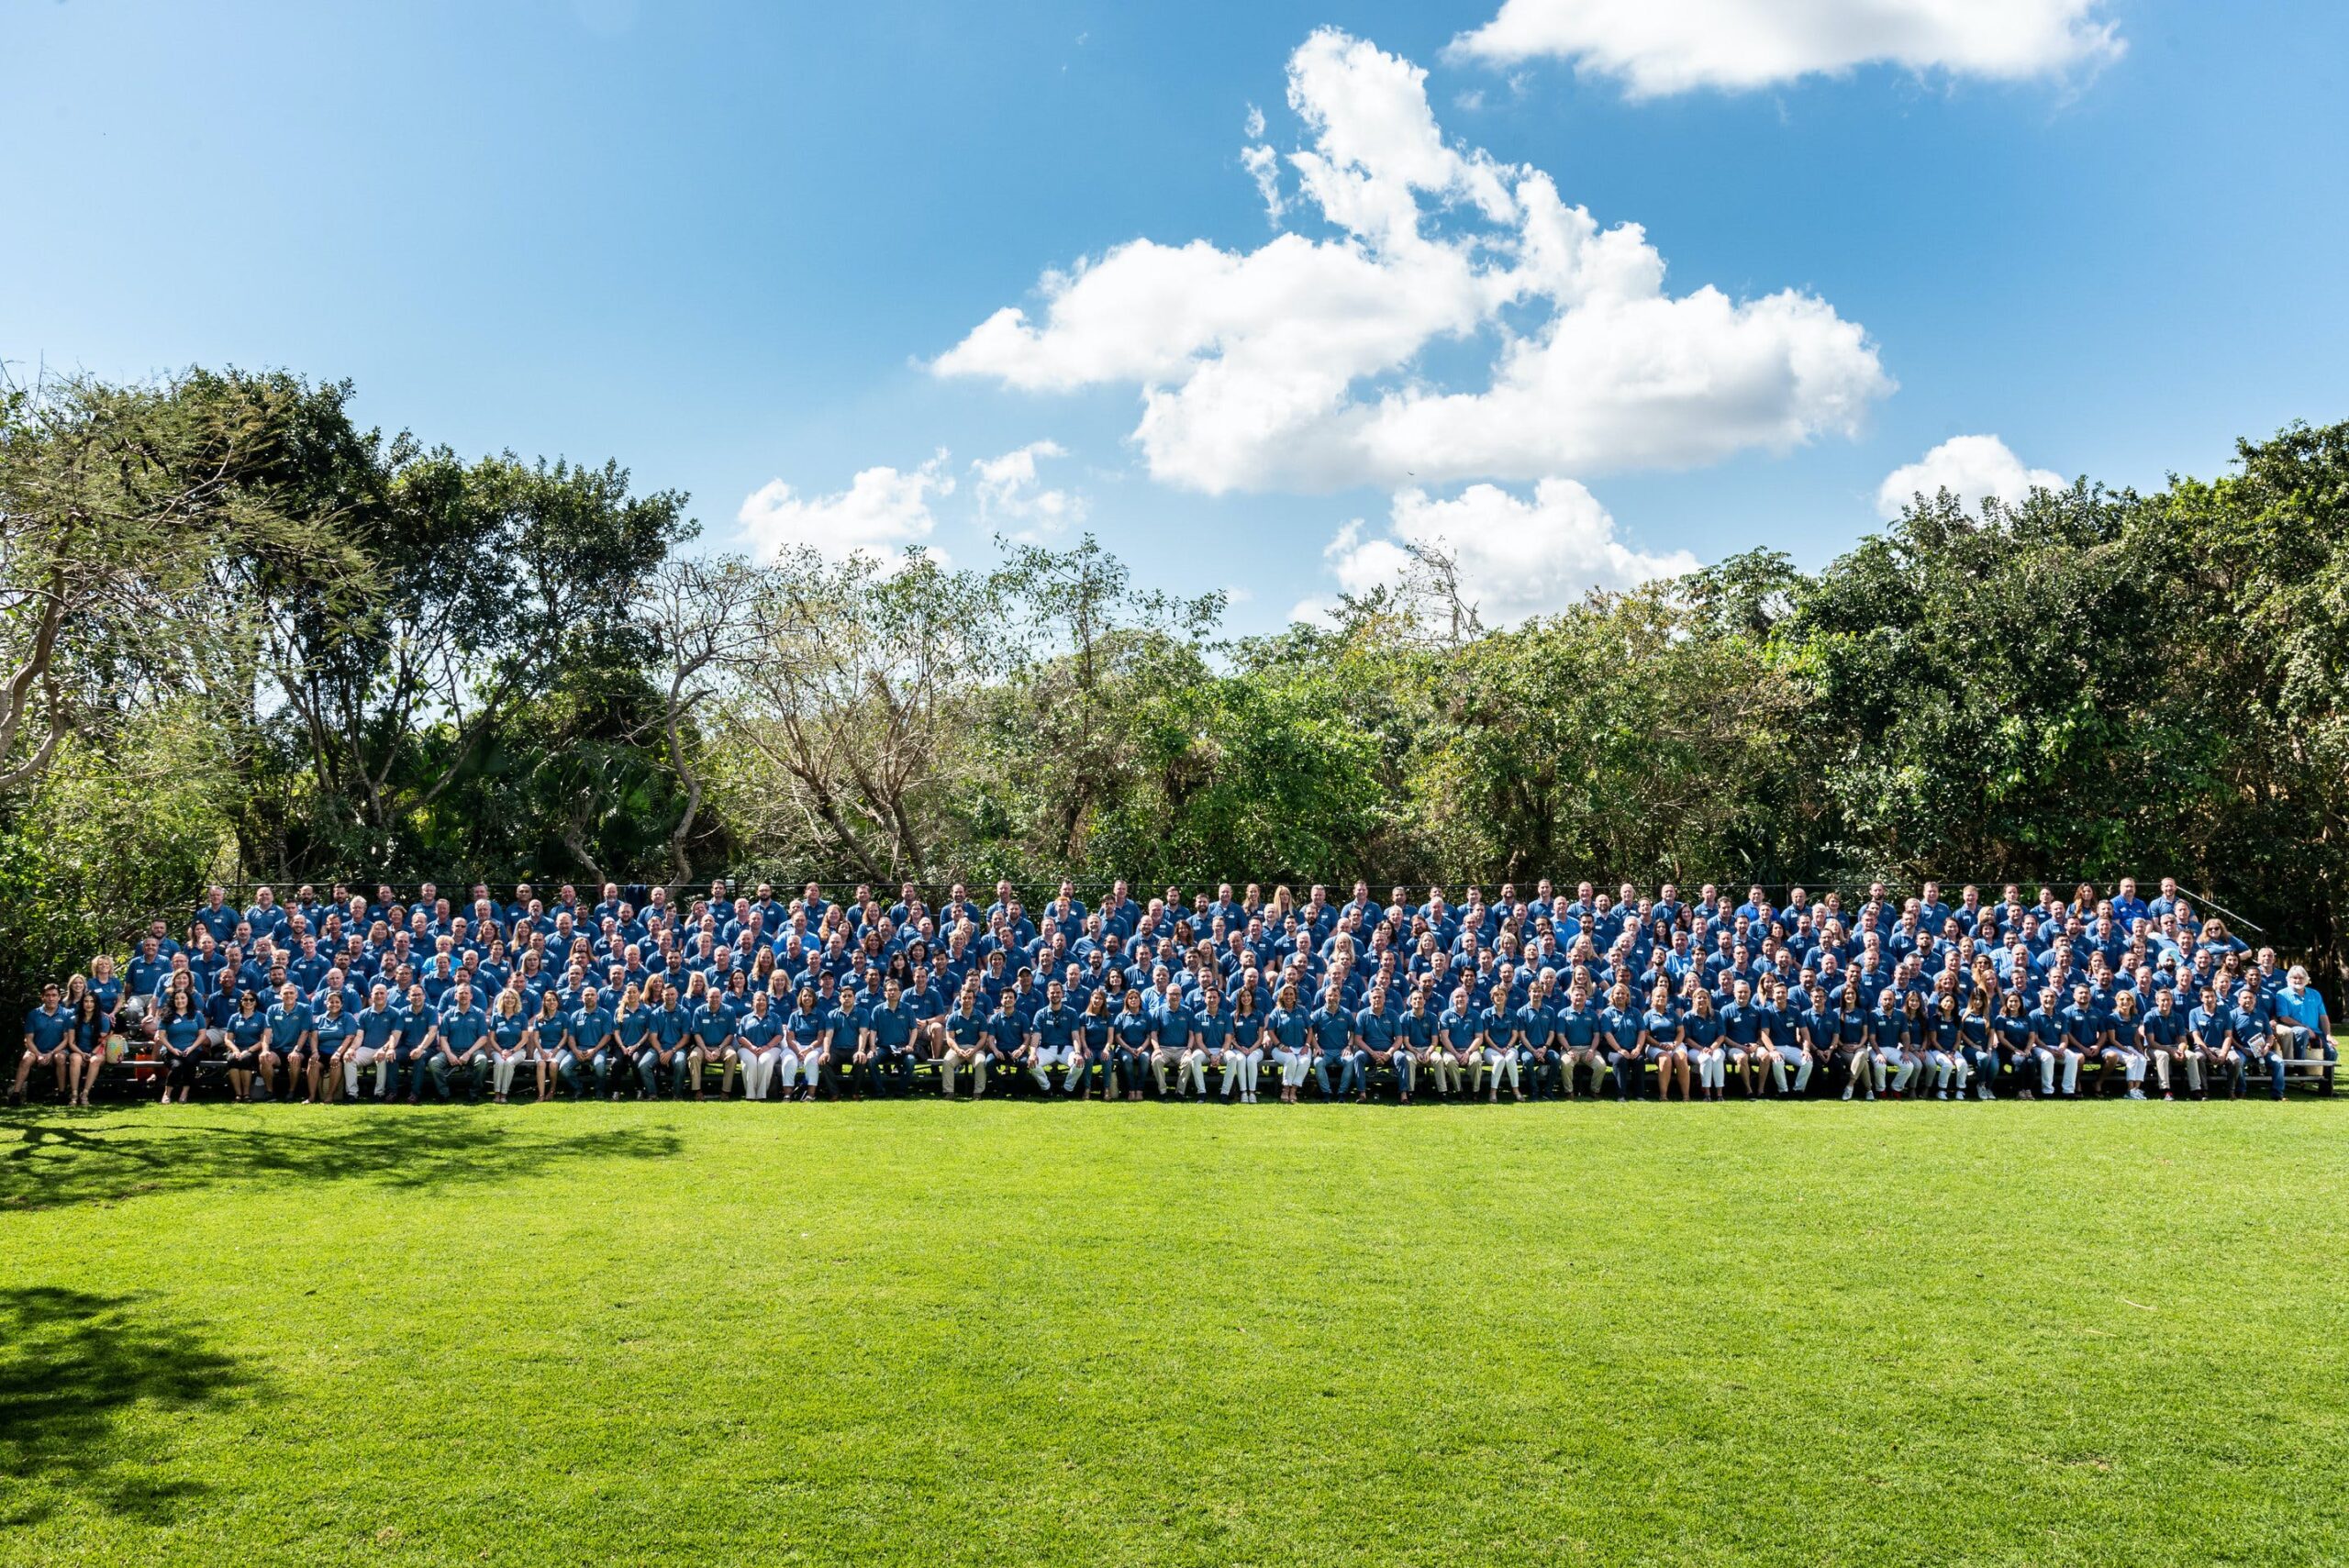 Image of rsz c100 group photo 1 1 scaled in Record number of participating companies in the latest edition of the "Cosentino 100" Convention - Cosentino